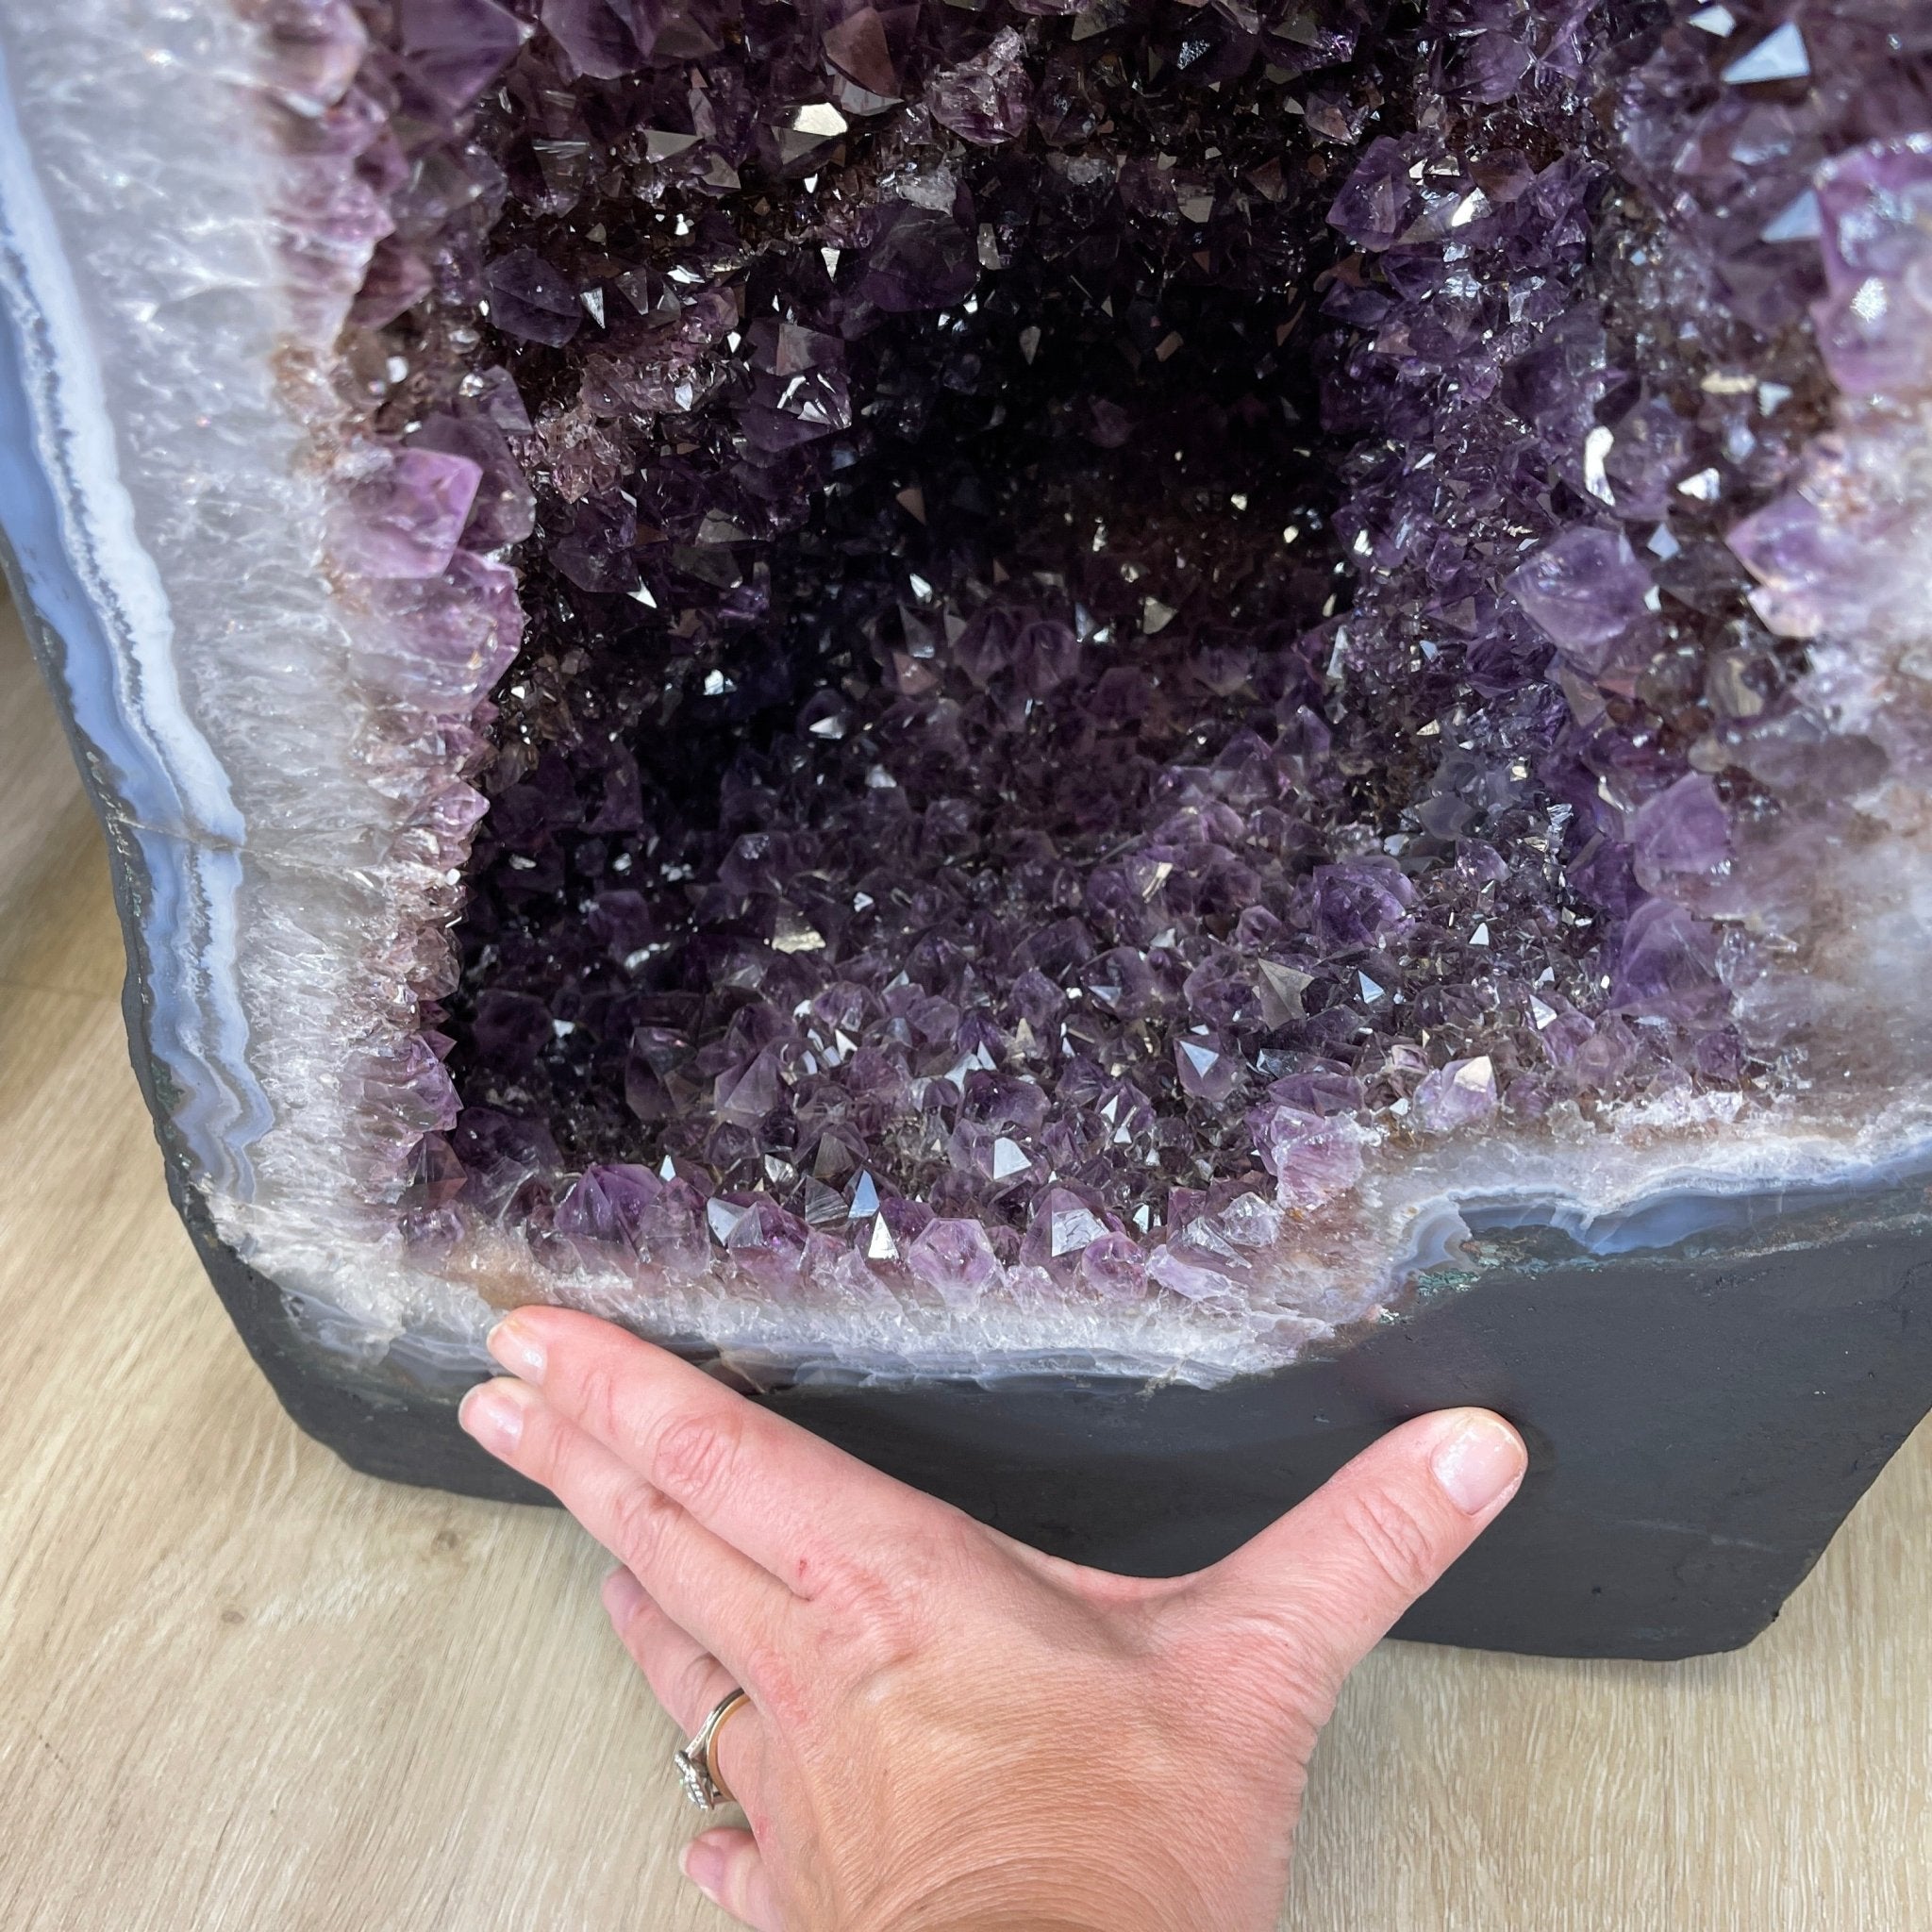 Extra Quality Brazilian Amethyst Cathedral, 39.25” tall & 191.8 lbs #5601-0398 by Brazil Gems - Brazil GemsBrazil GemsExtra Quality Brazilian Amethyst Cathedral, 39.25” tall & 191.8 lbs #5601-0398 by Brazil GemsCathedrals5601-0398